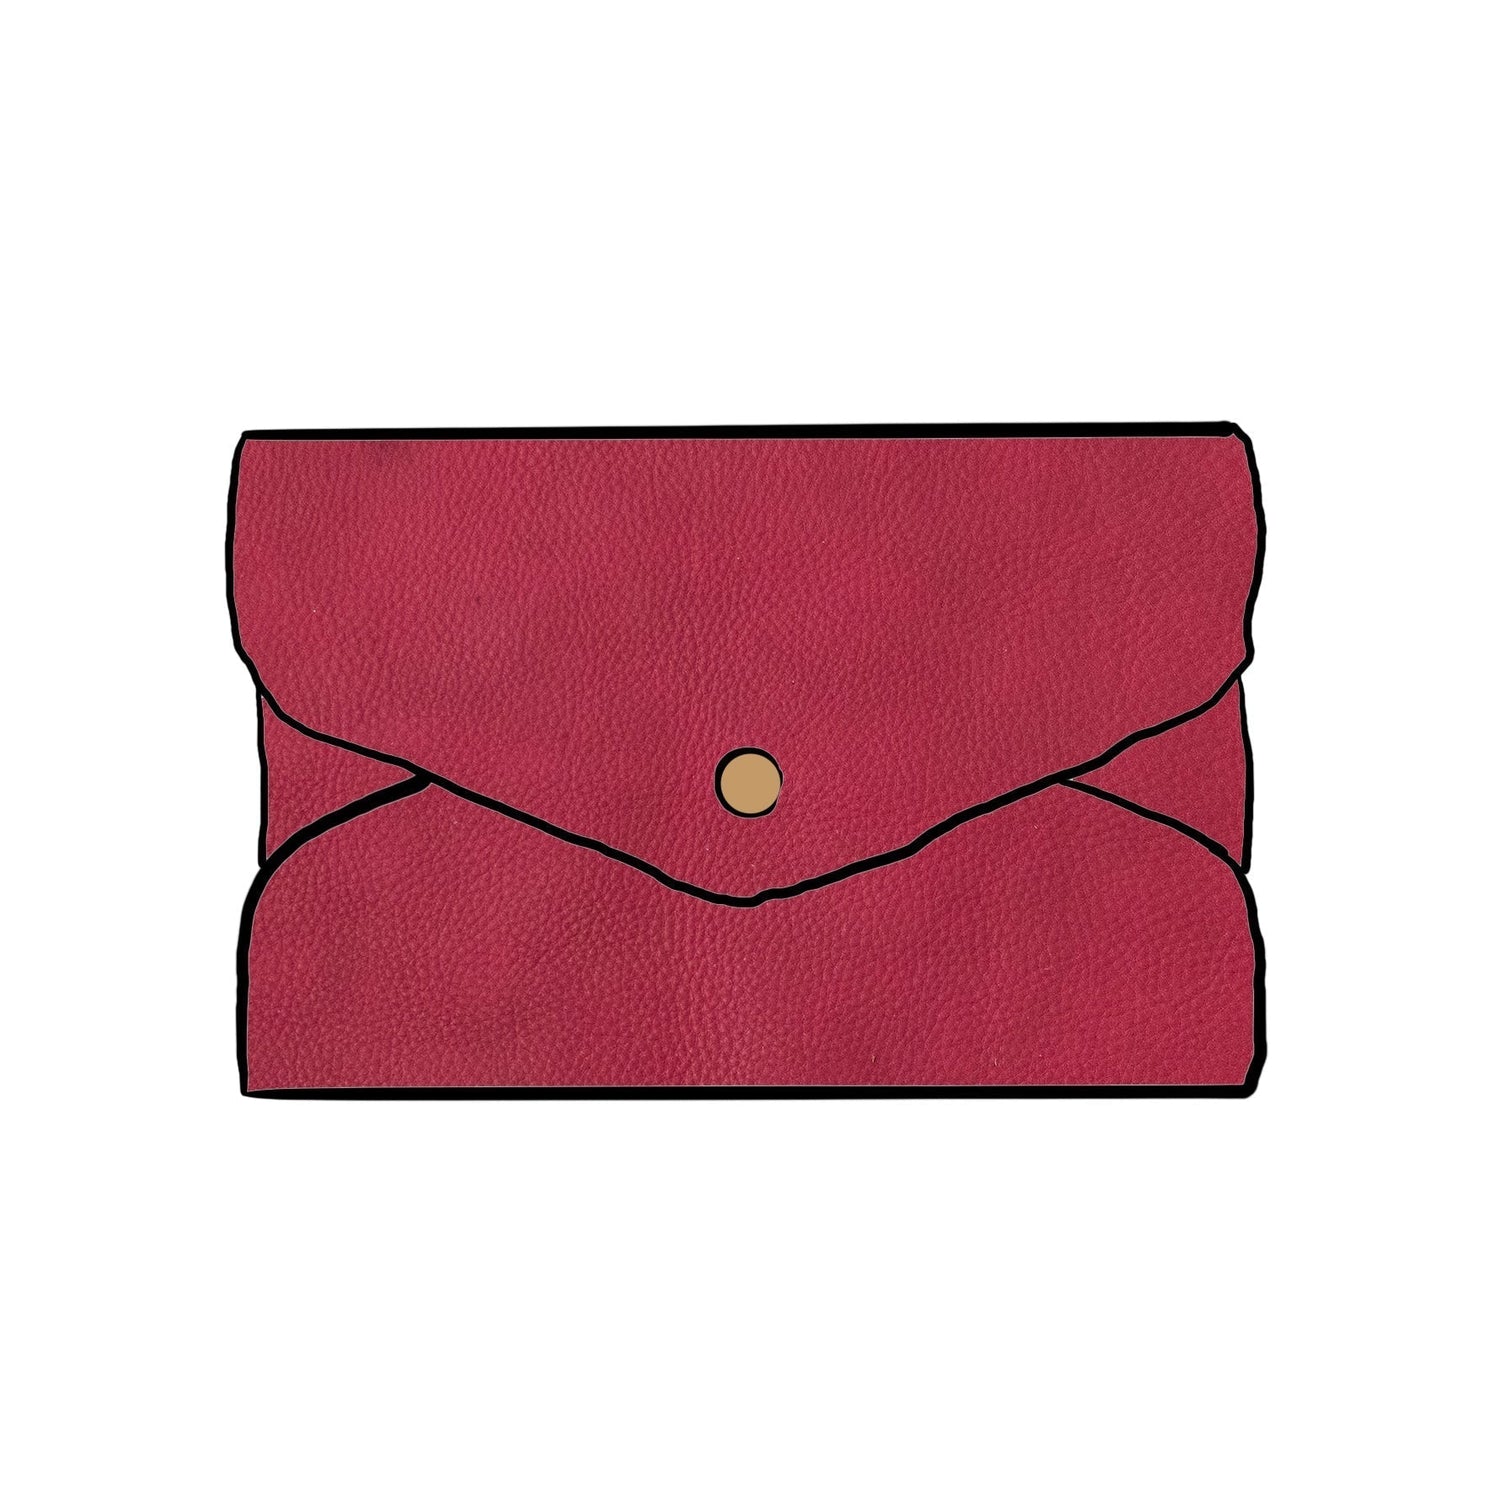 Rose Cypress Envelope Clutch- leather clutch bag - handmade leather bags - KMM &amp; Co.